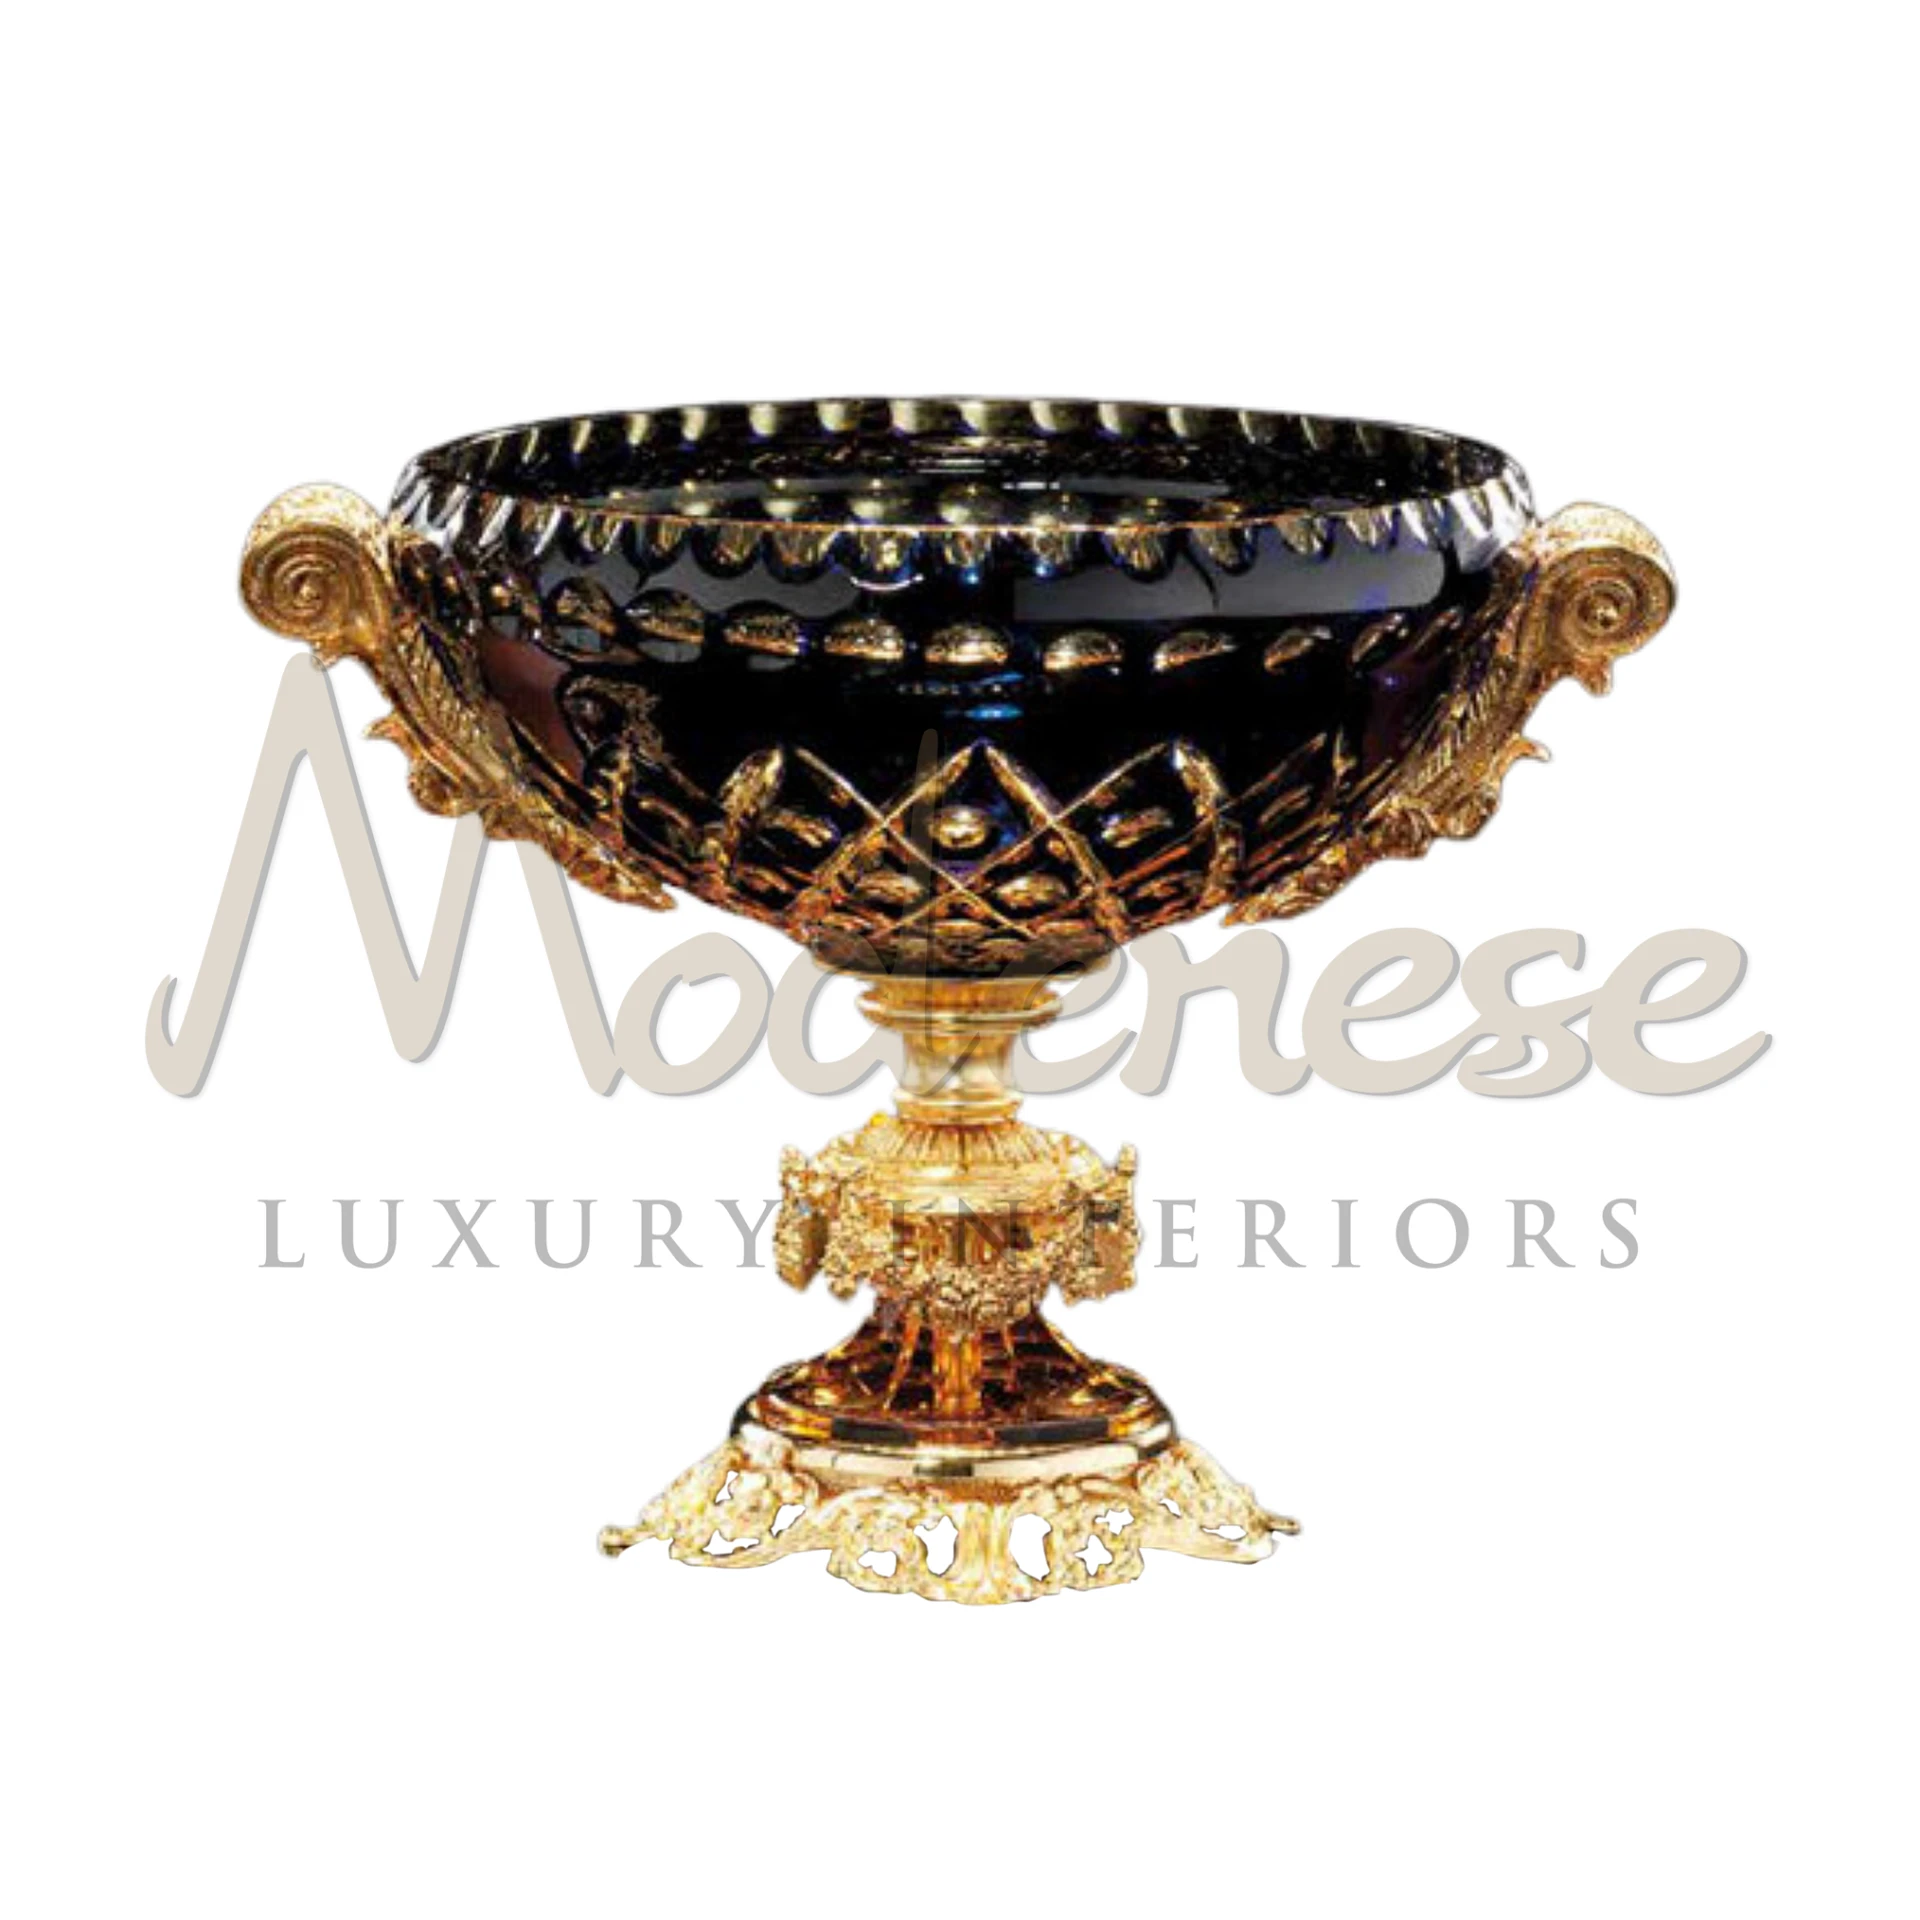 Modern Stylish Black Glass Bowl by Modenese, high-quality and sleek design for contemporary luxury interiors.